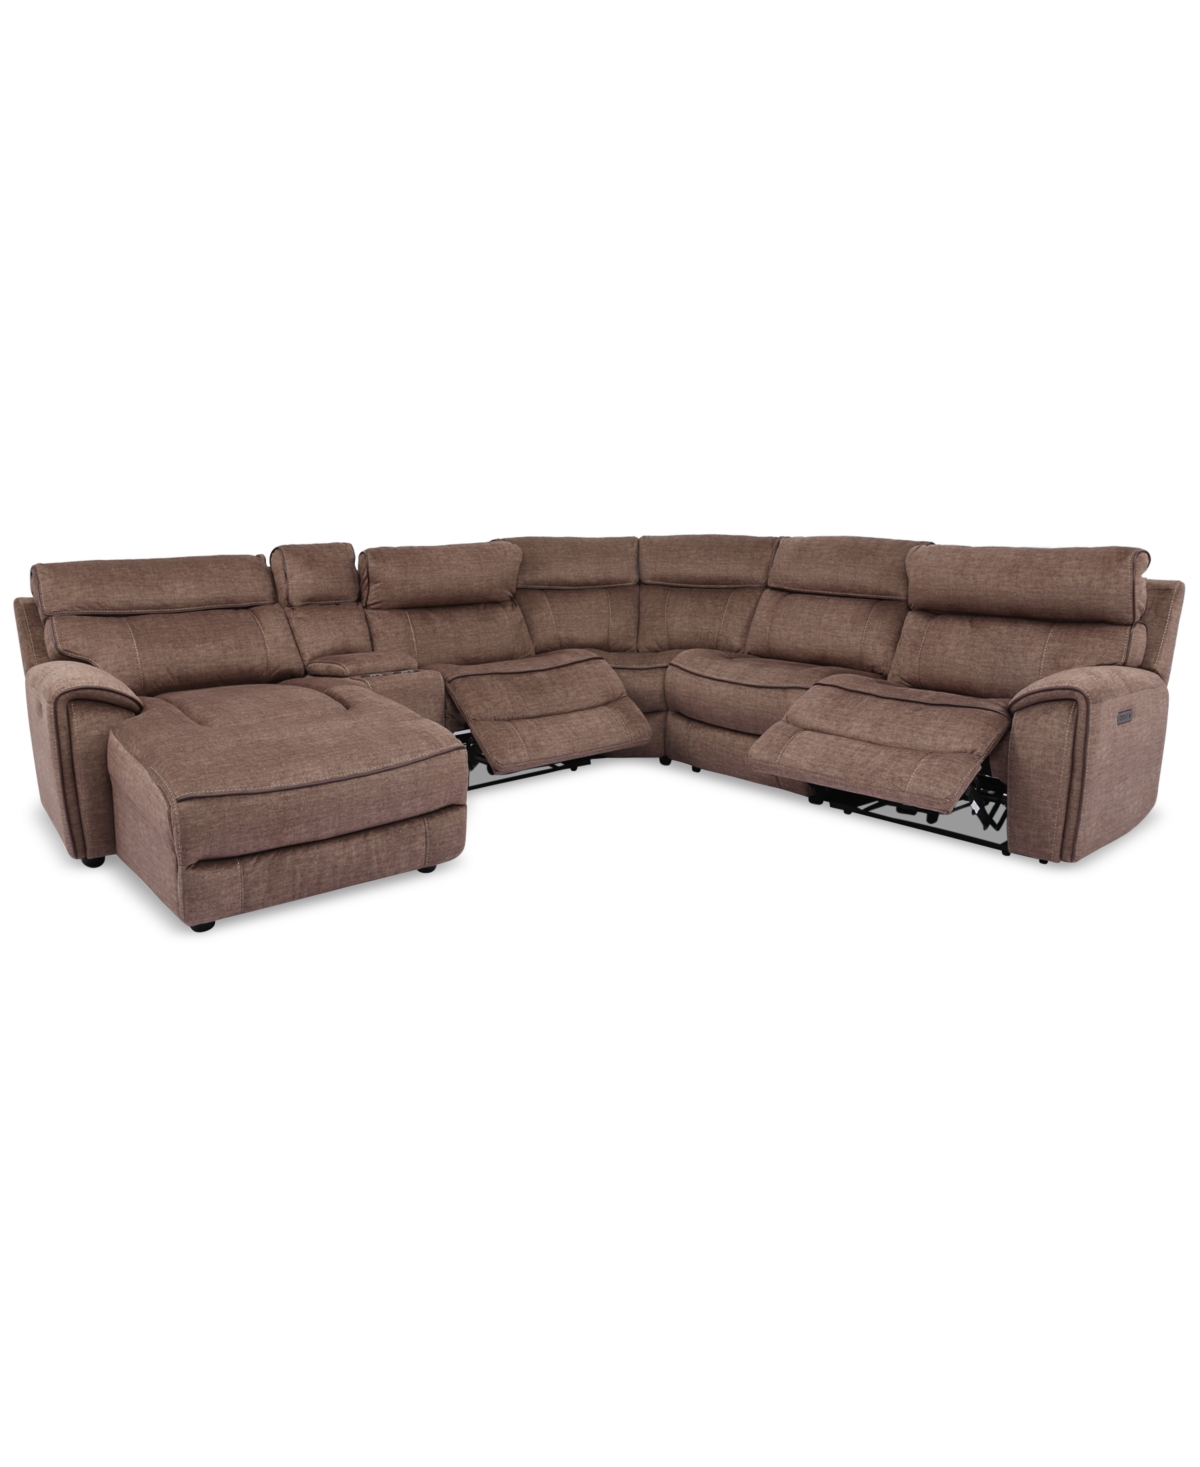 Furniture Hutchenson 6-pc. Fabric Chaise Sectional With 2 Power Recliners And Console In Chocolate Brown